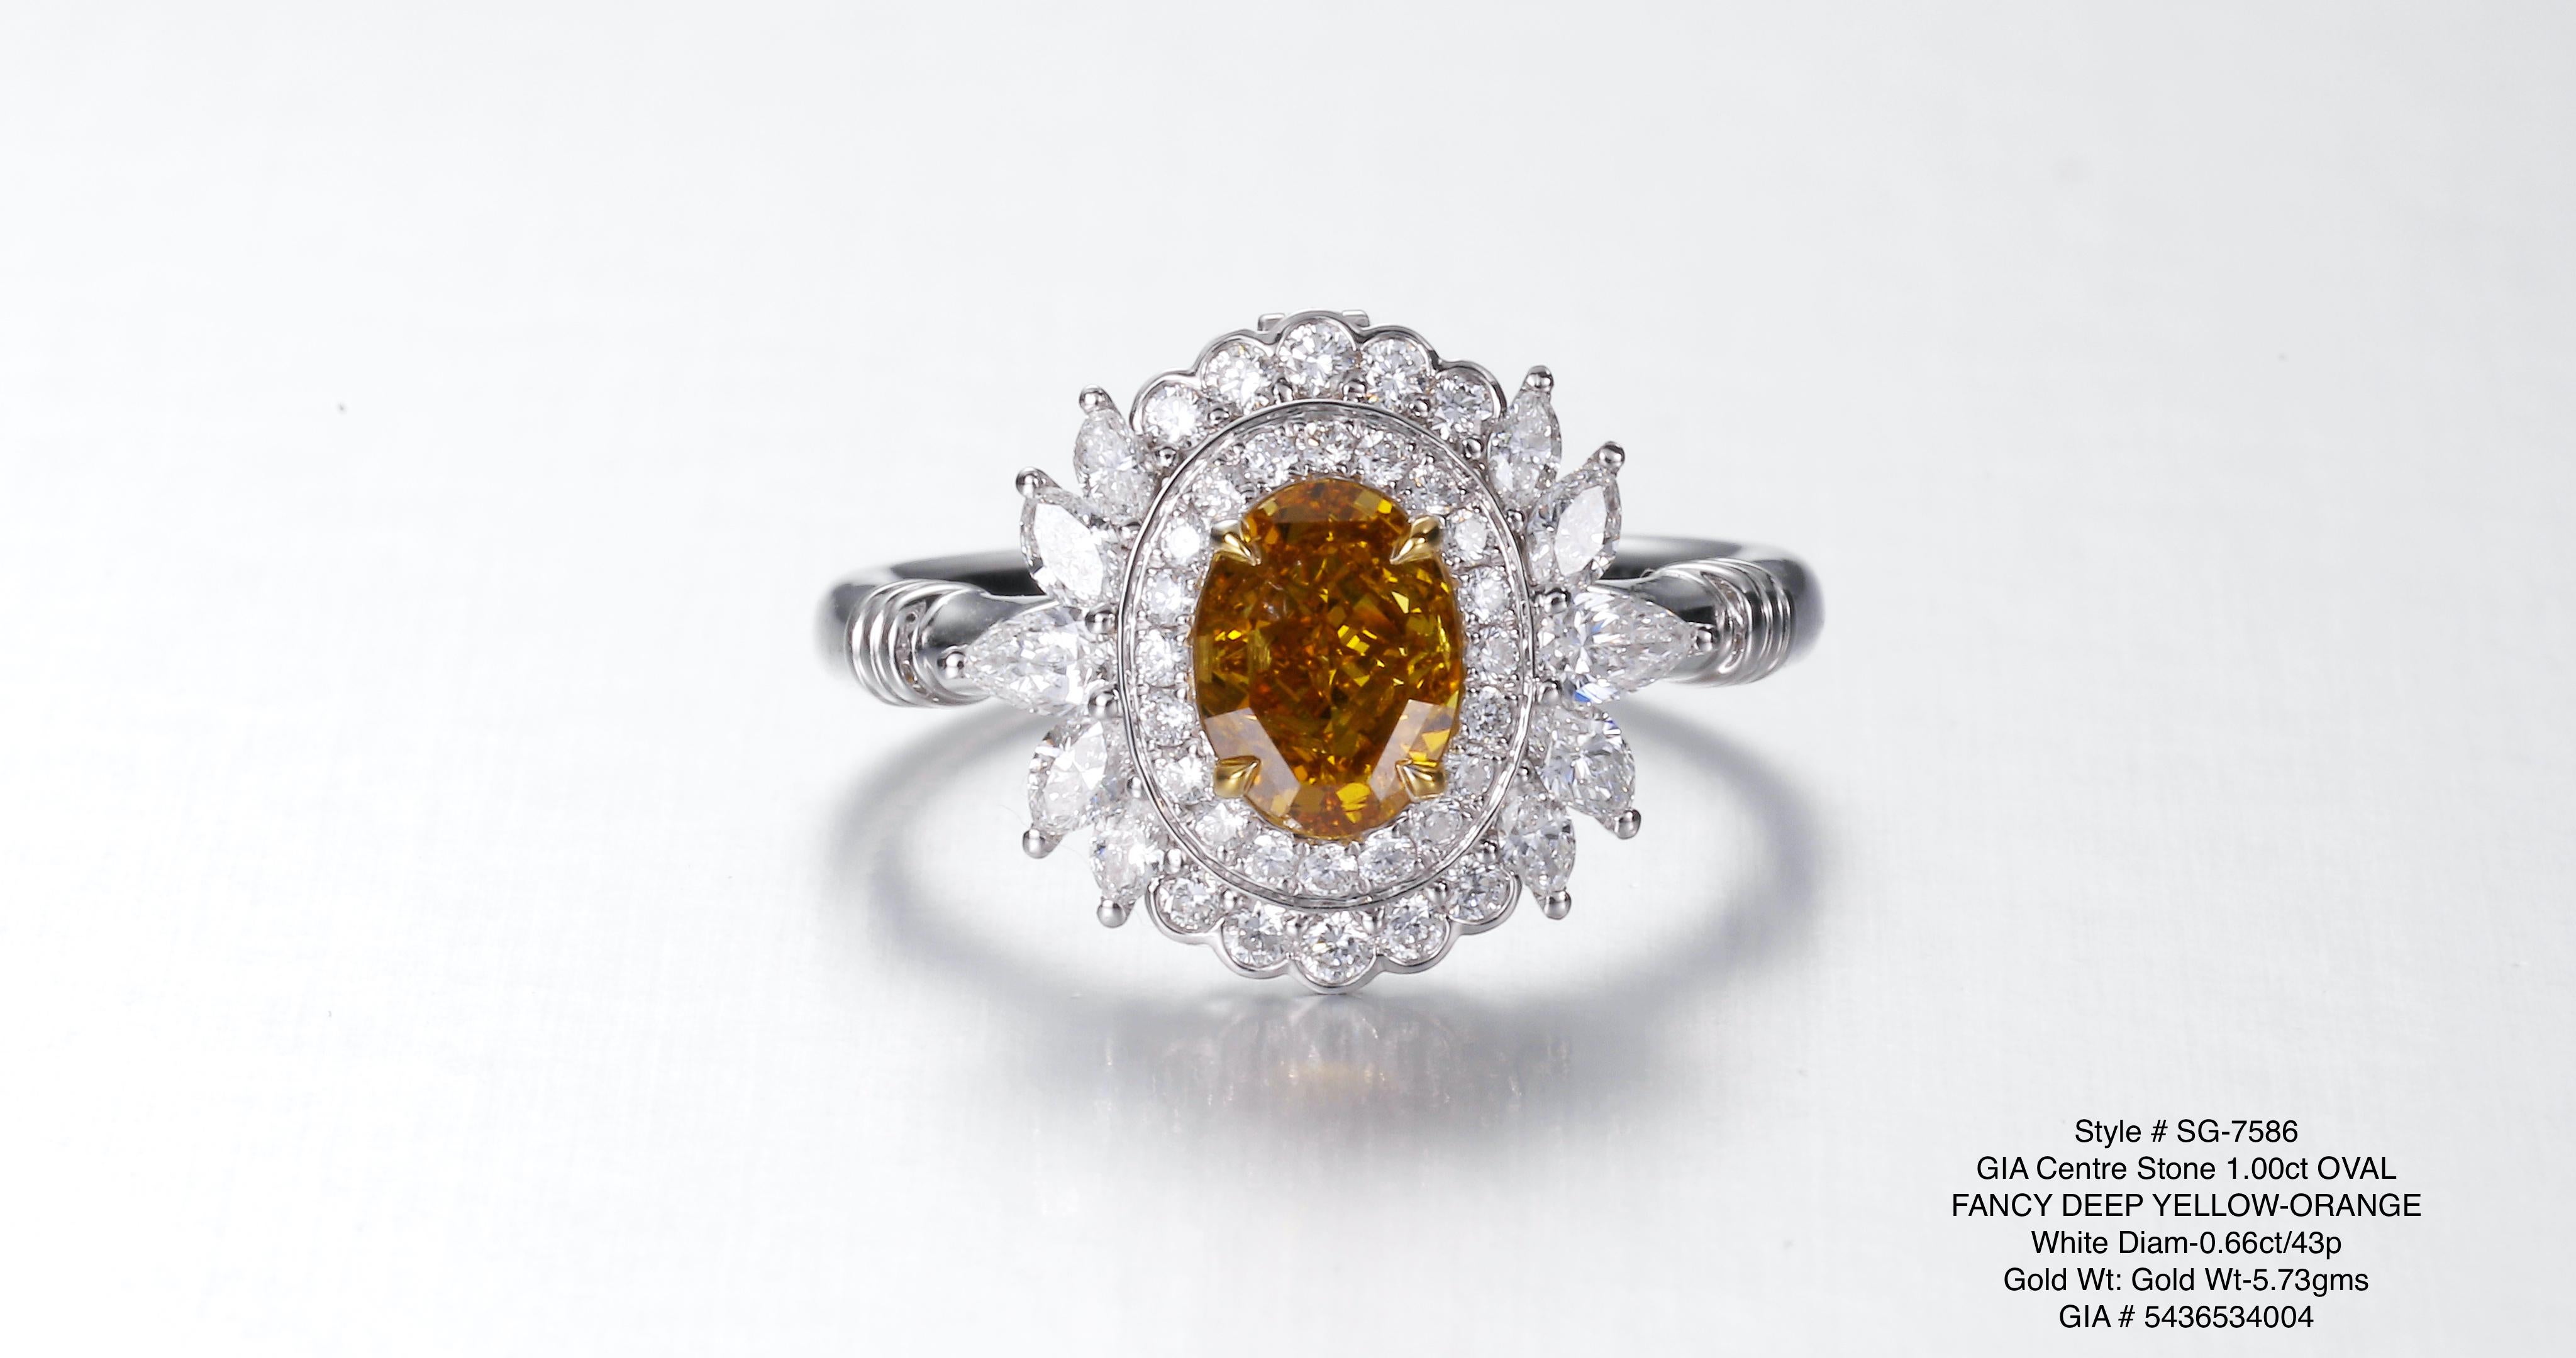 The focal point of this stunning ring is the remarkable 1.00ct GIA certified natural fancy deep yellow orange diamond, renowned for its intense and vibrant hues. Its warm and fiery tones exude a sense of energy and passion, making it a truly